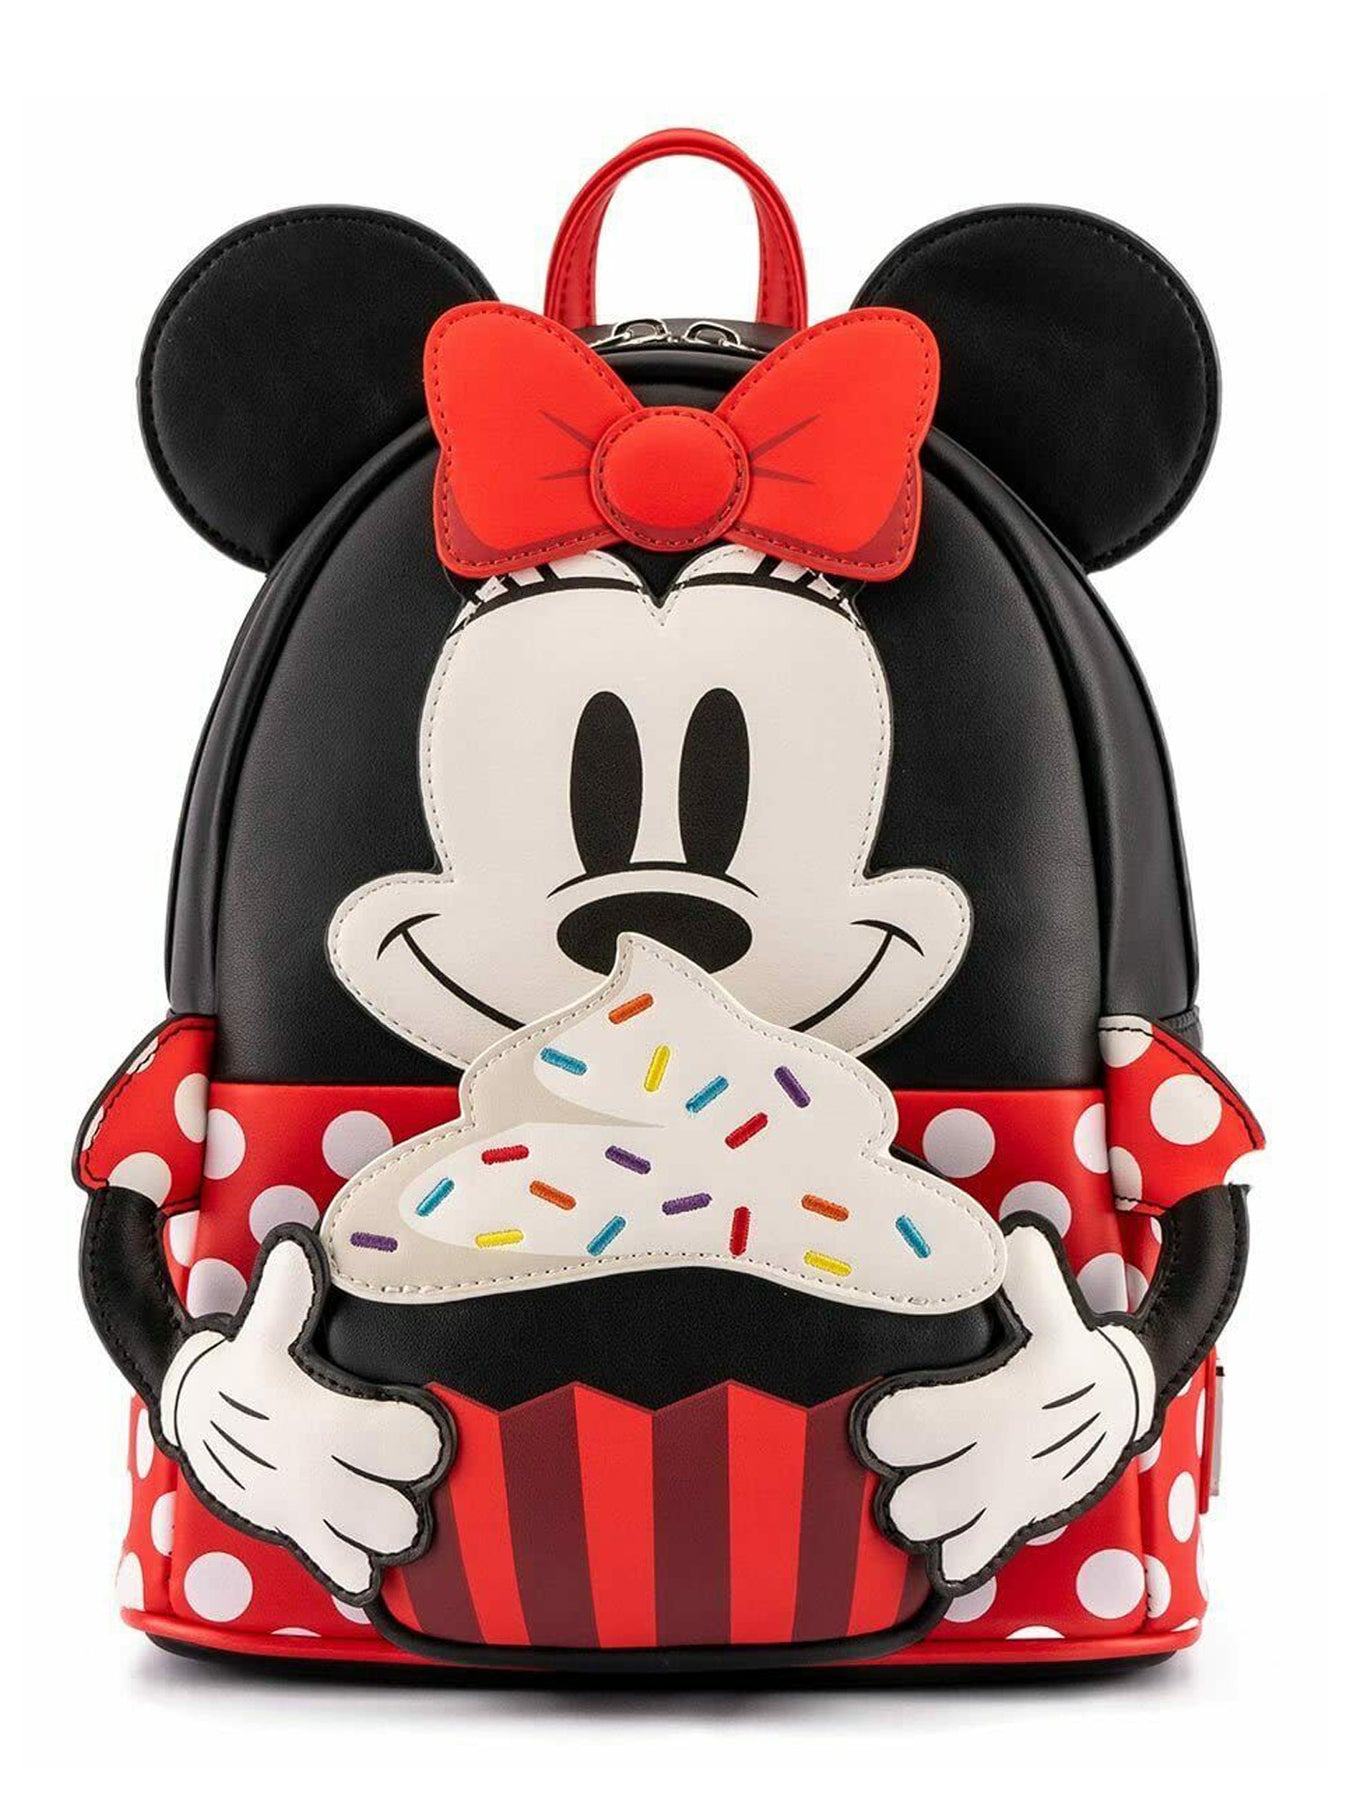 Disney Minnie Mouse Dual Compartment w/Ears & Bow Insulated Lunch Tote Red